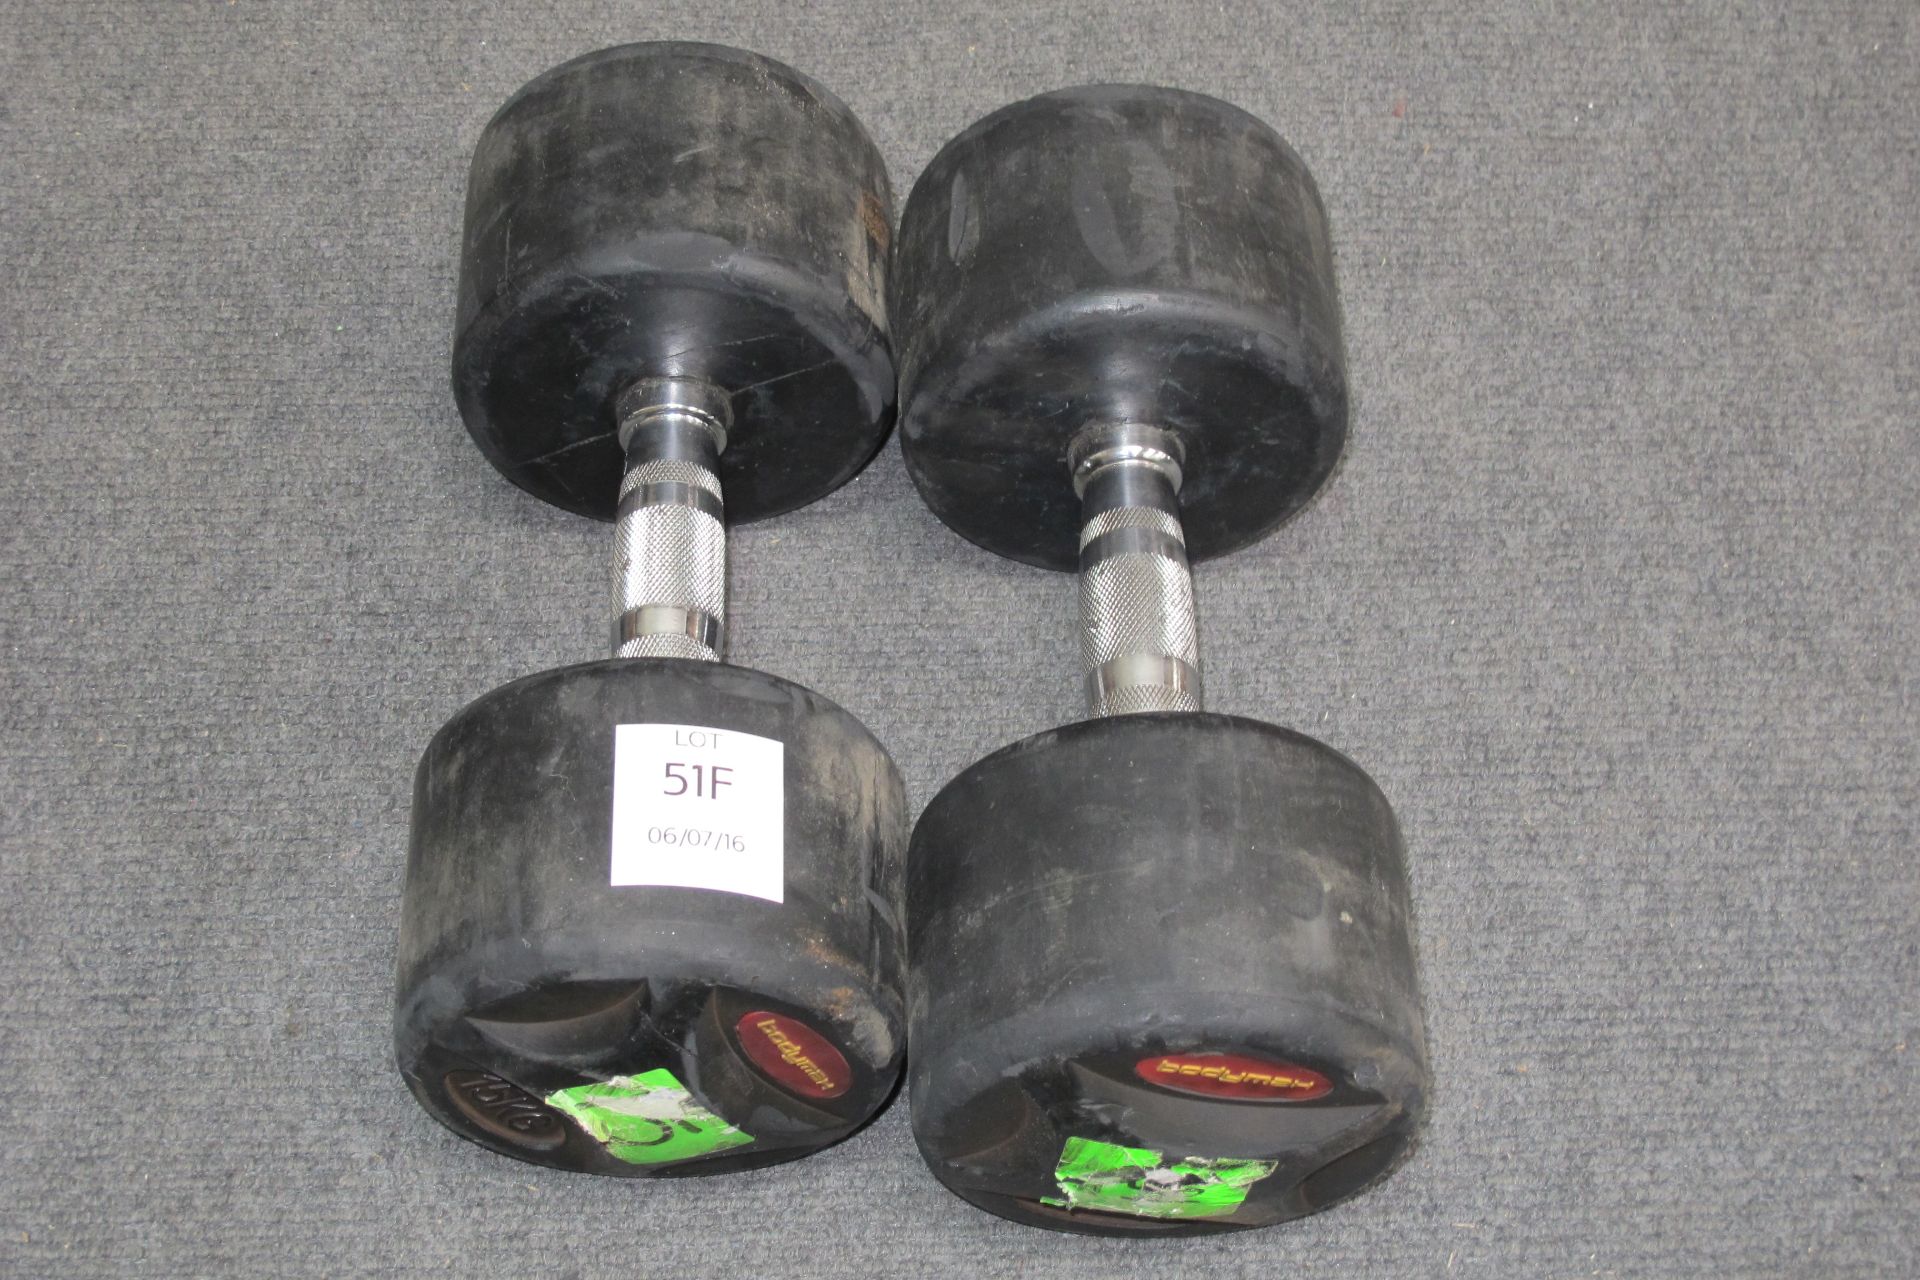 * Pair of Bodymax Rubber Covered Dumbbells - 2 x 15kg